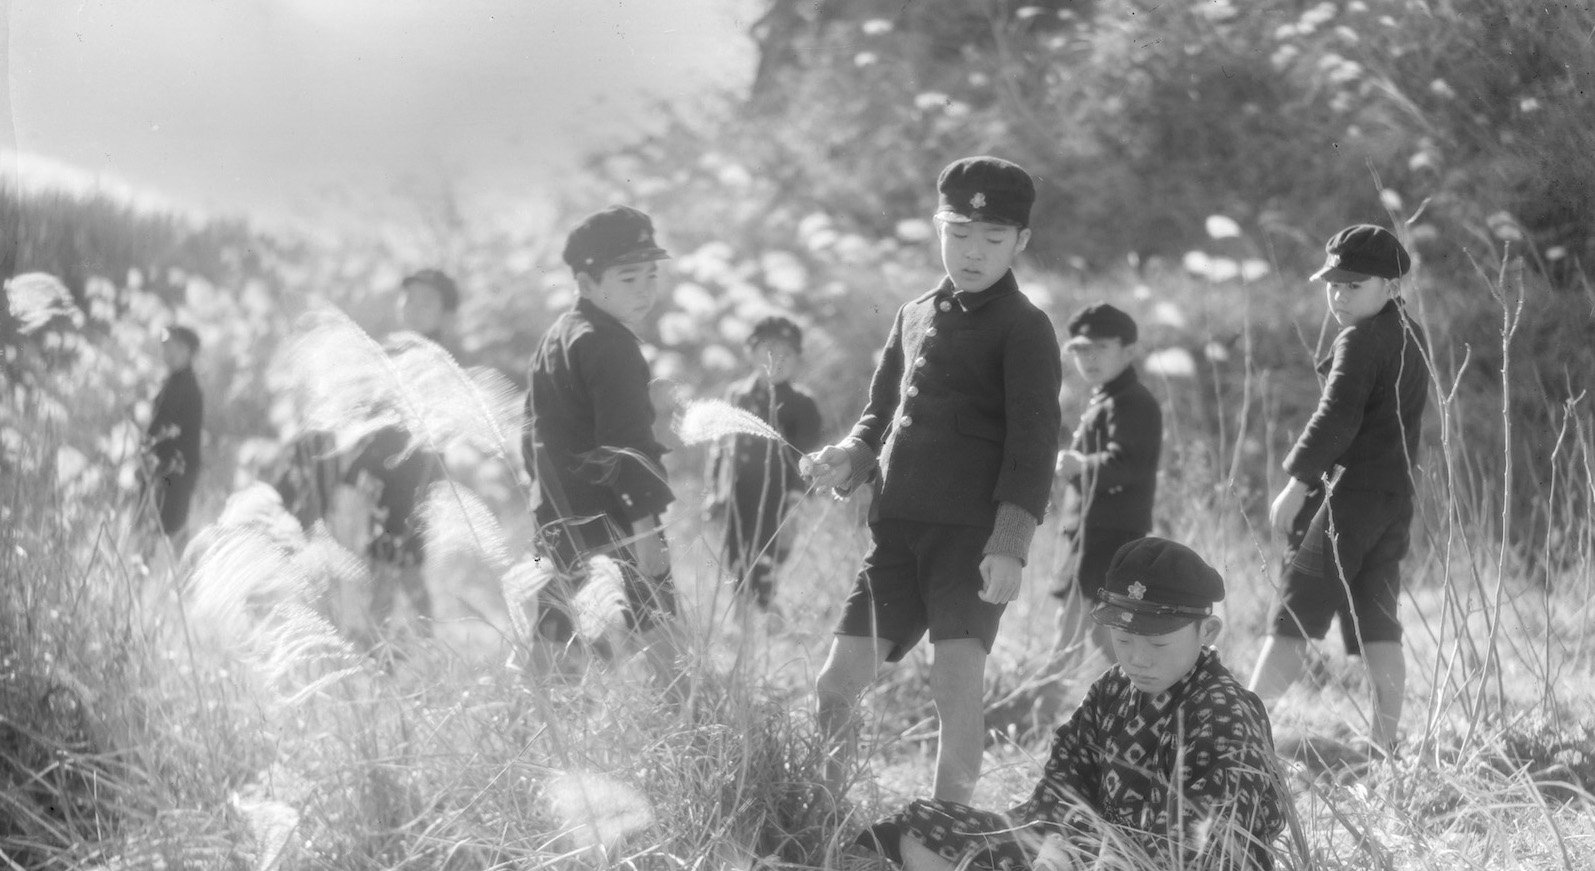 A black-and-white image from the 1930s of young Japanese boys dressed in school uniforms and caps standing amidst a sun-dappled field of wheat